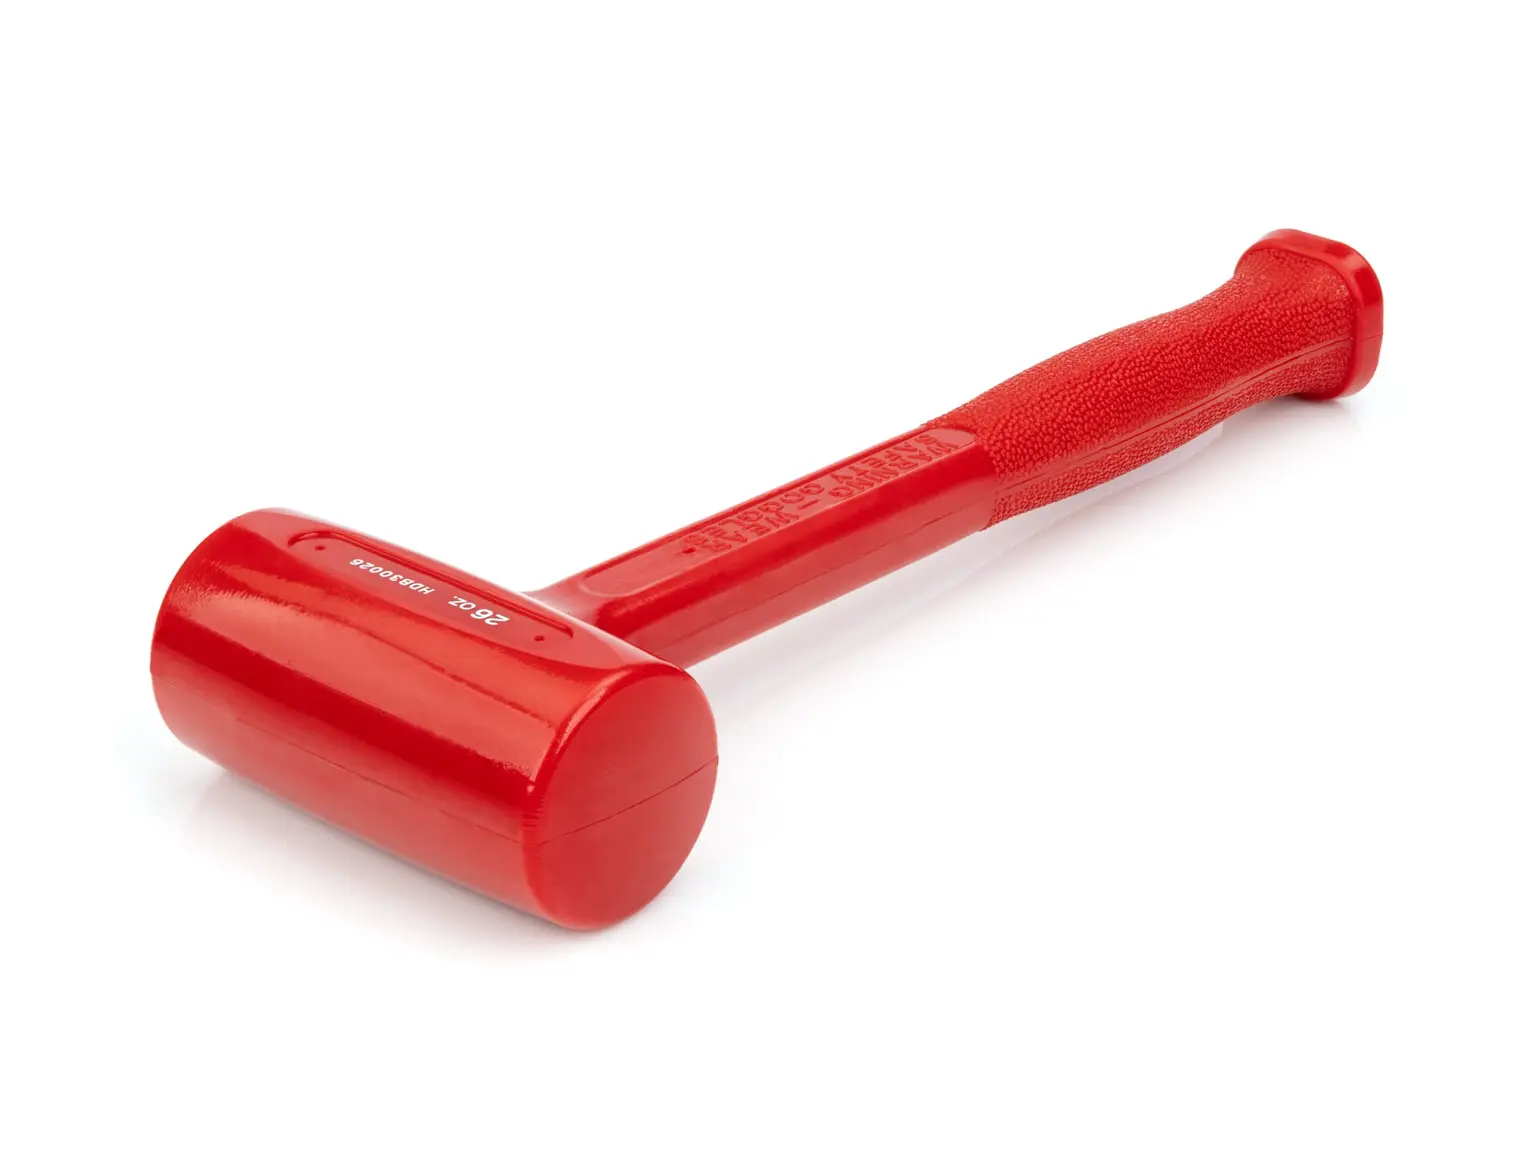 Tekton 26 oz. Dead Blow Hammer from GME Supply